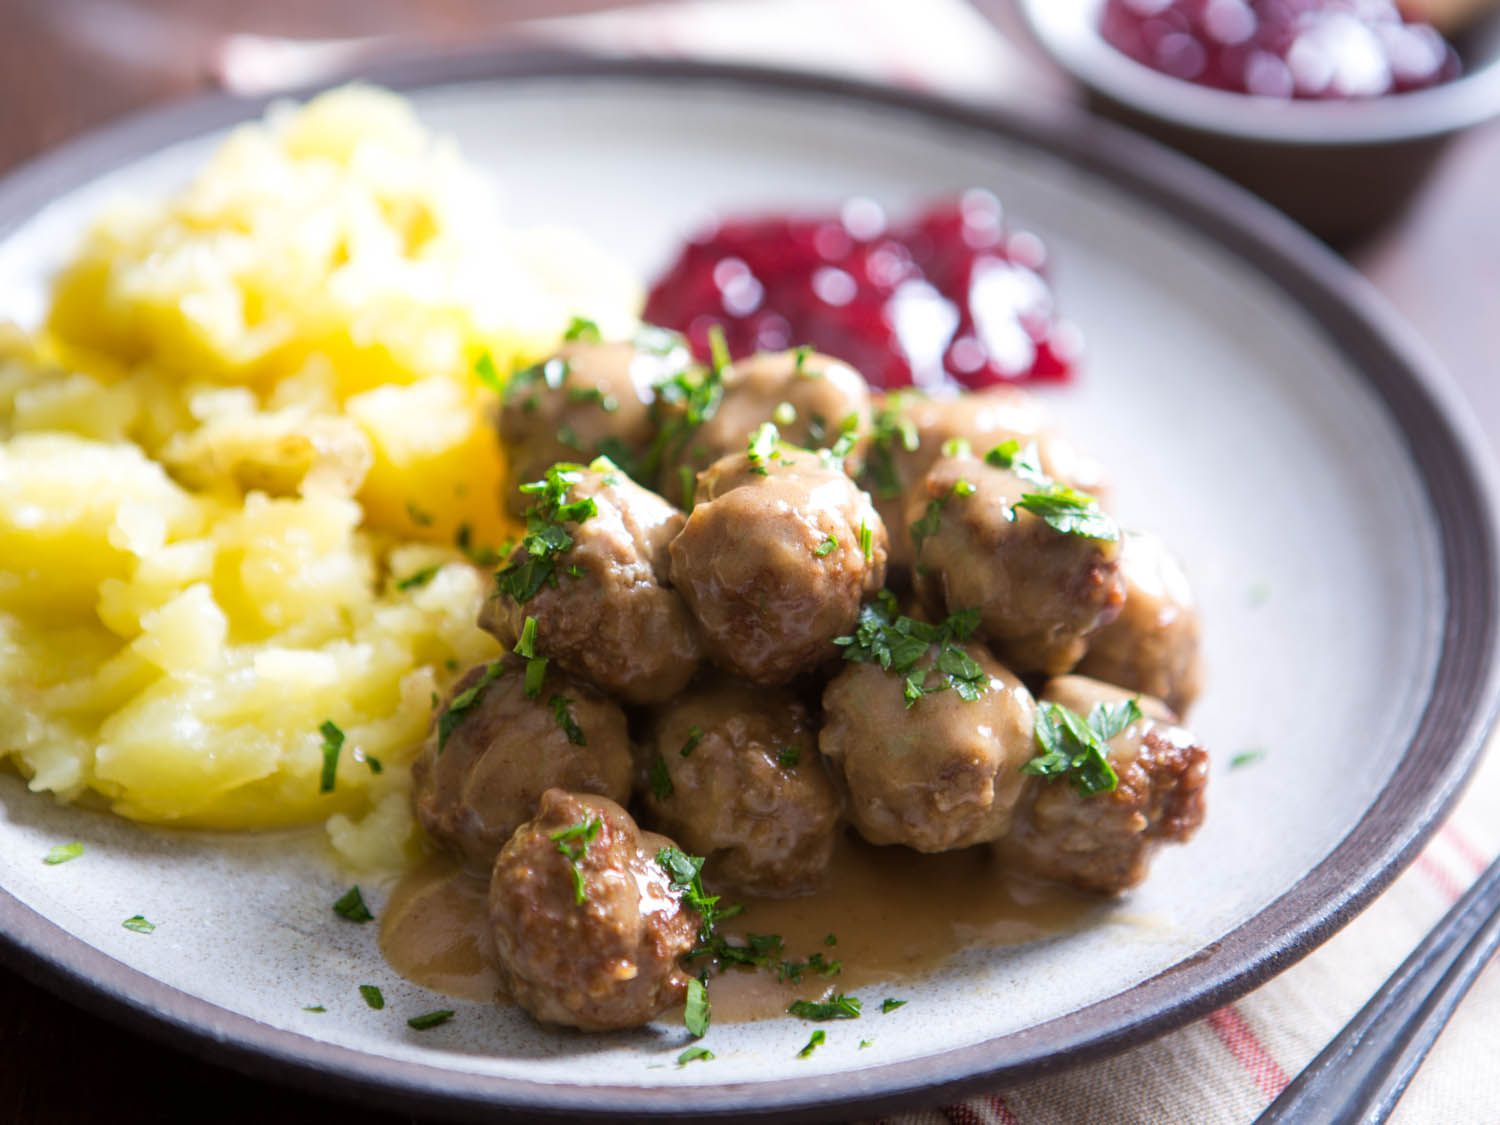 Plate of gravy-coated Swedish meatballs garnished with chopped parsley, boiled potatoes, and lingonberry jam